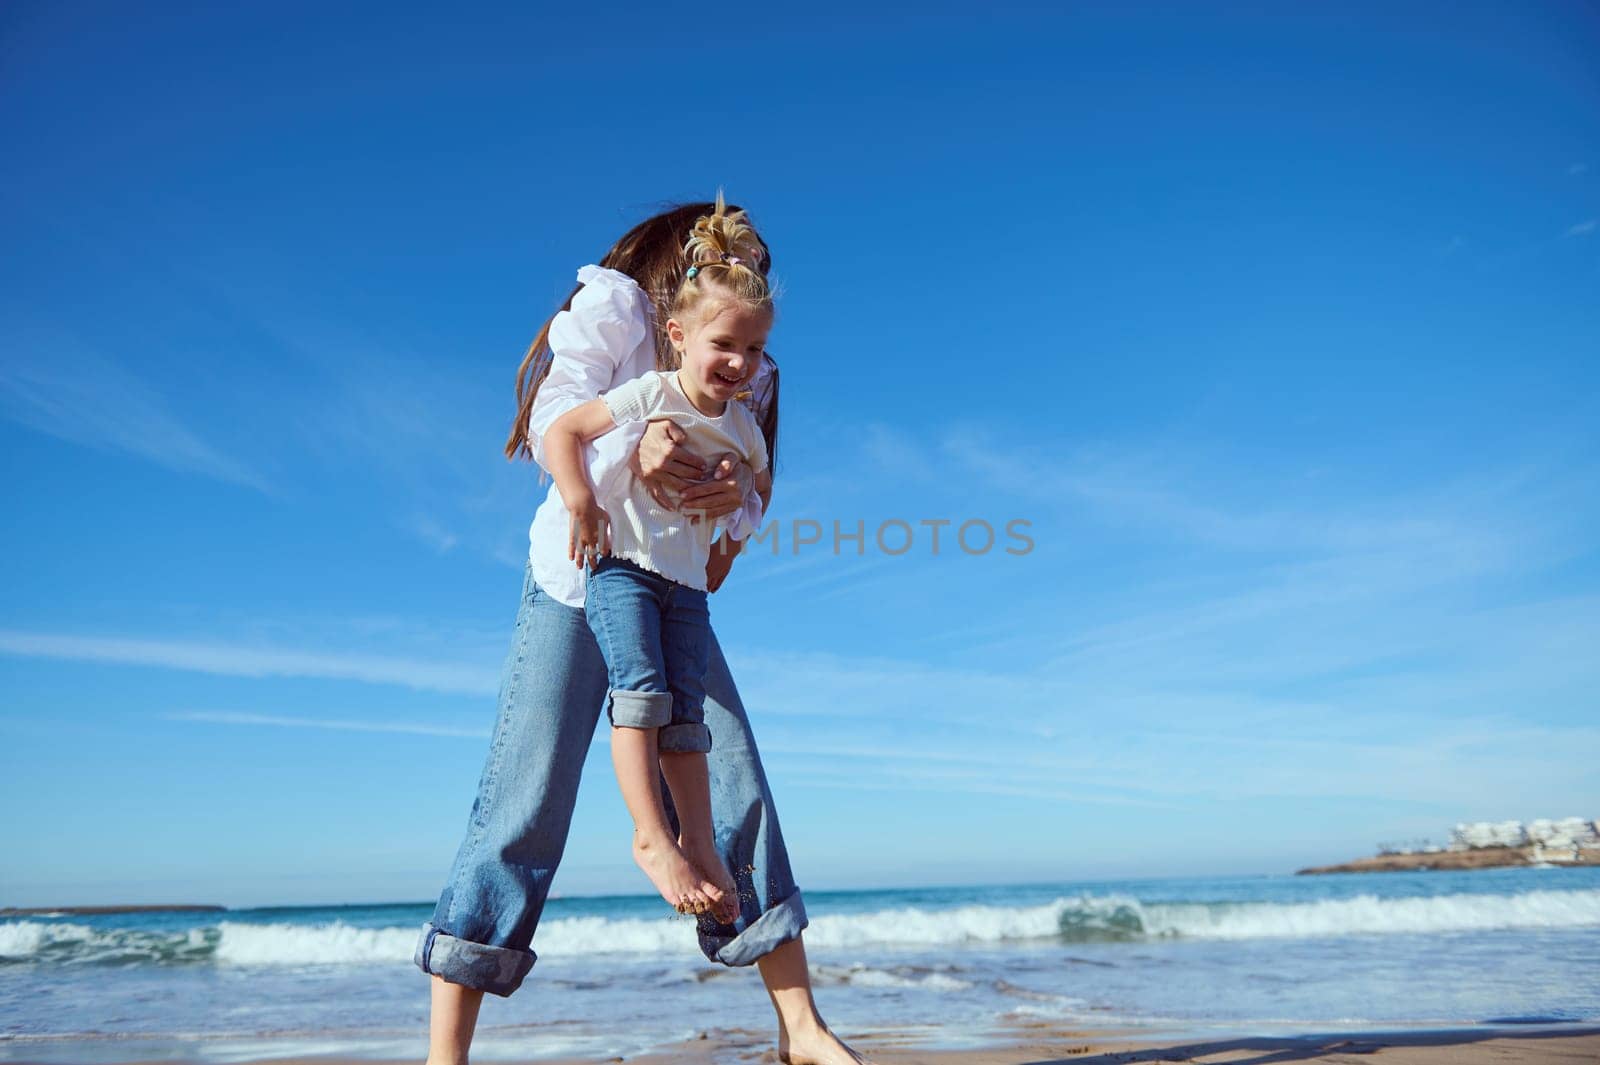 Mother and daughter playing together on the beach. Happy little kid girl smiling and expressing positive emotions while her mom carrying her, playing with warm waves